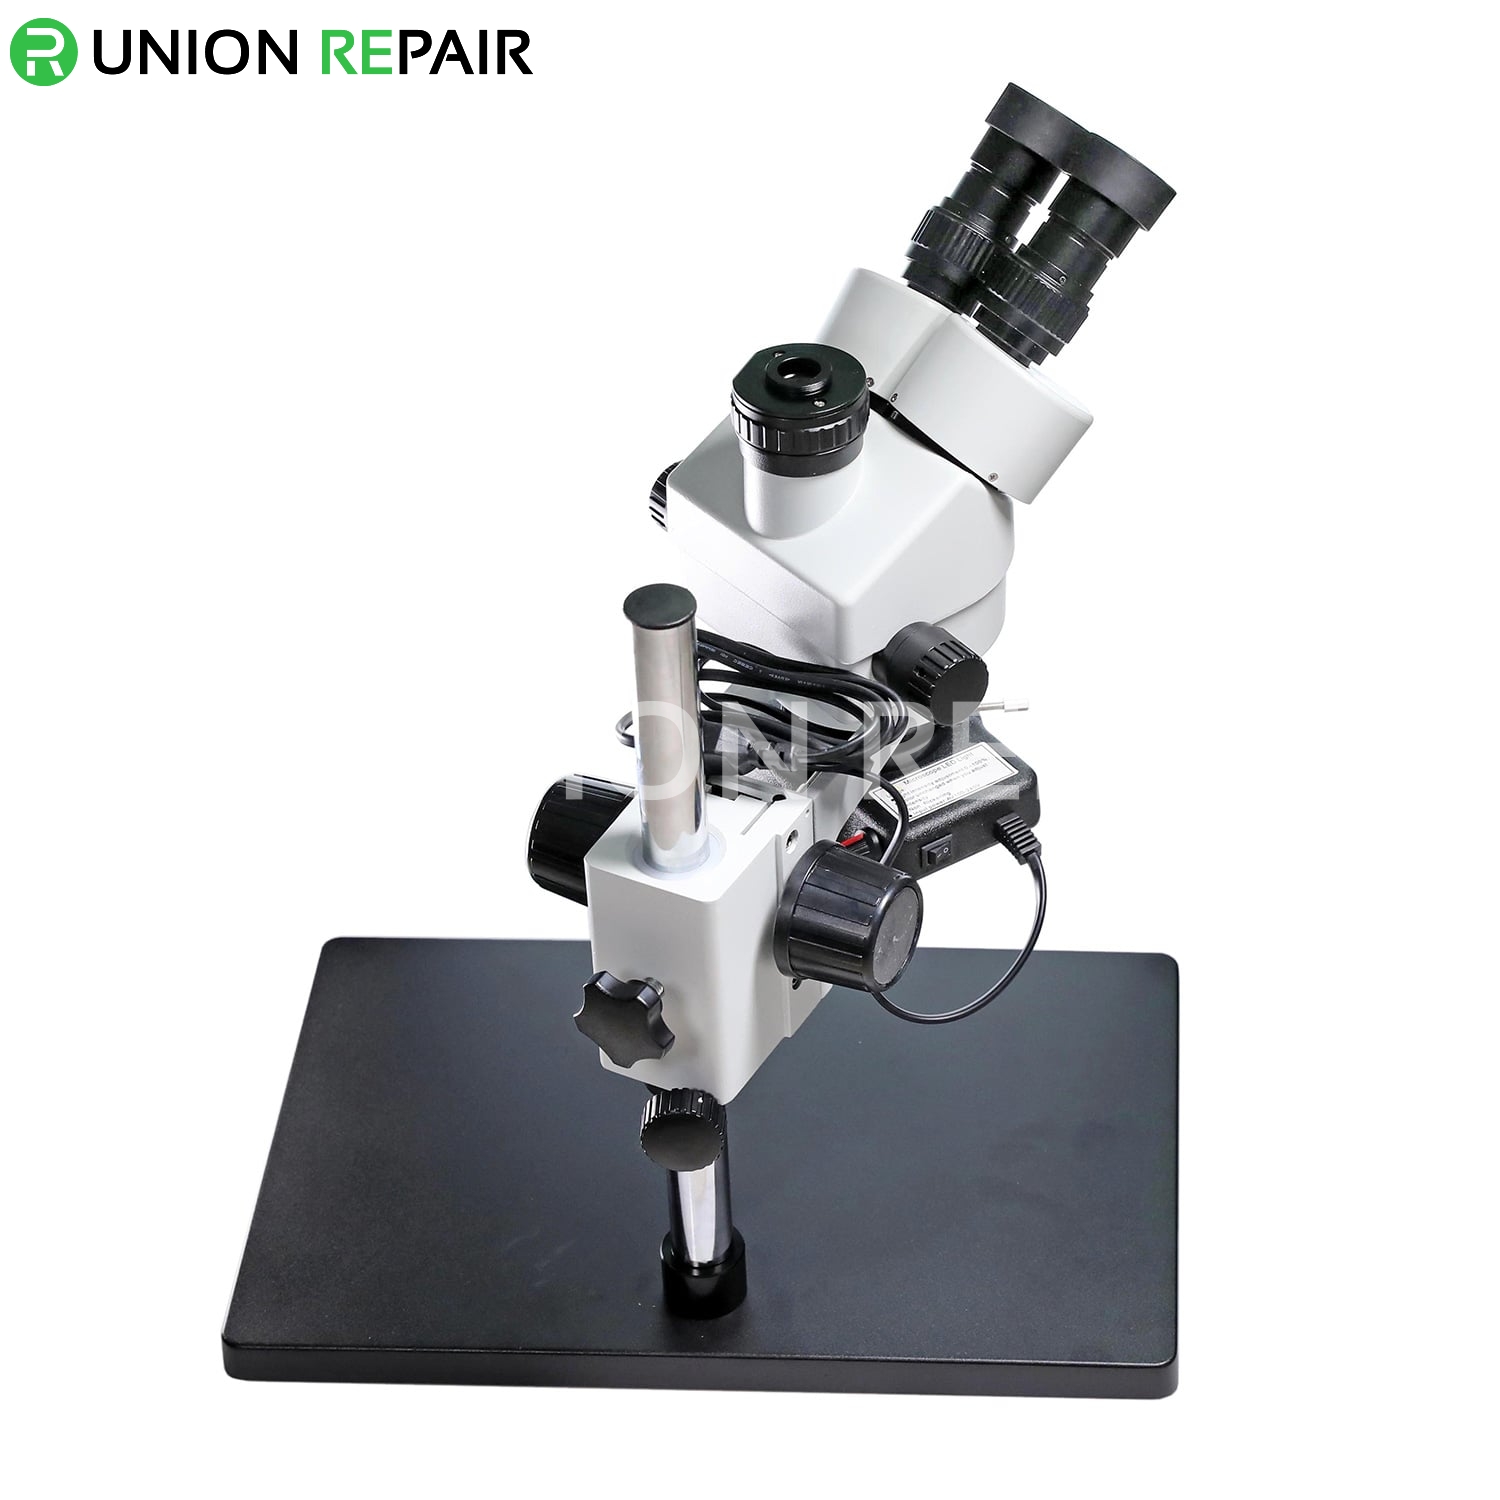 7-45x SZM45T-B1 Trinocular Industrial Stereo Microscope with LED lights